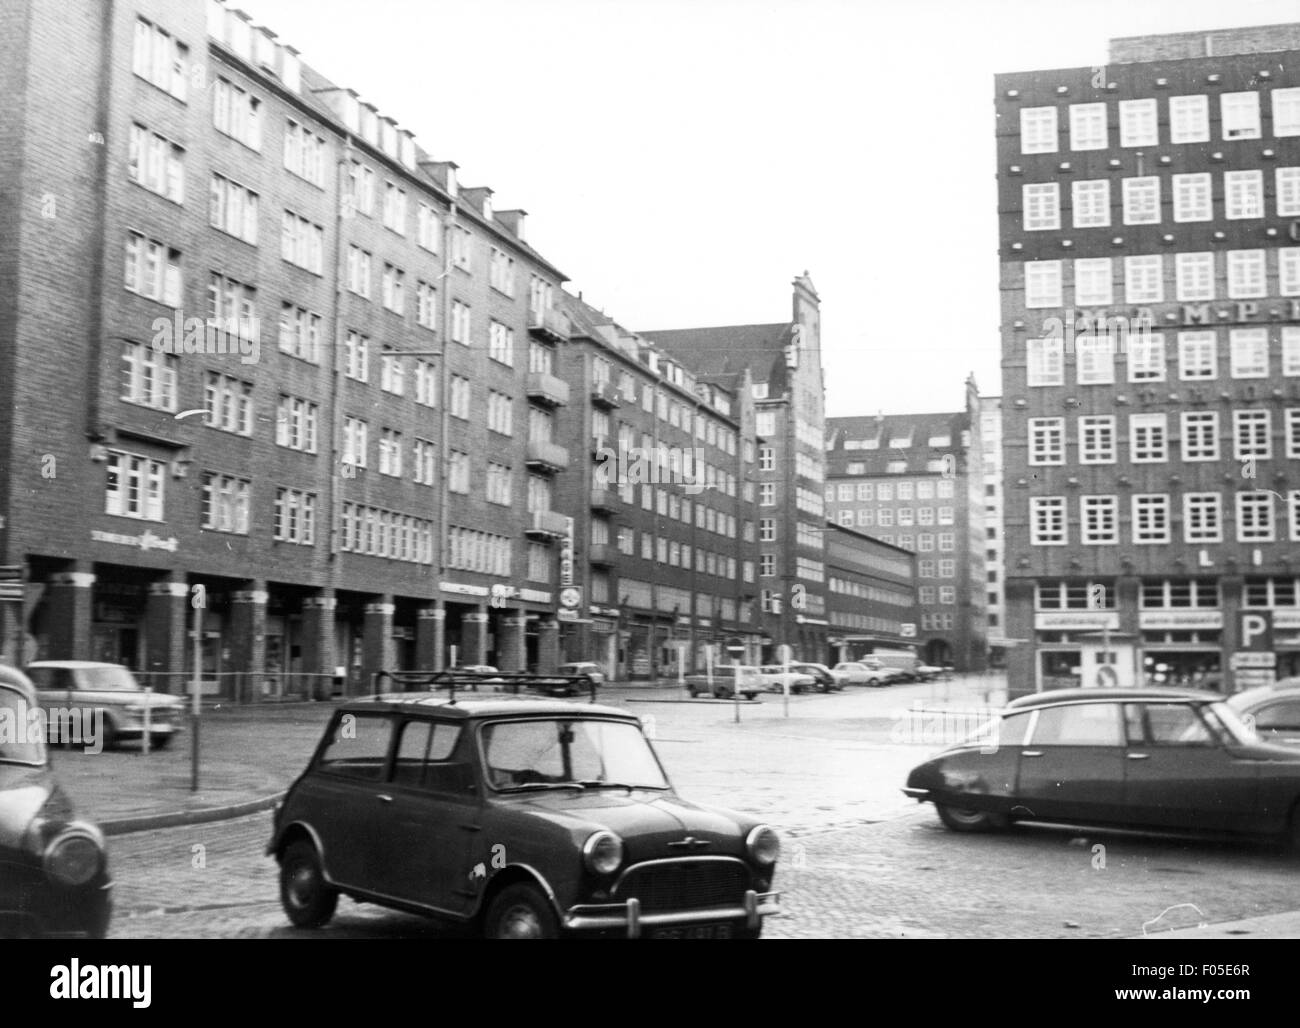 geography / travel,Germany,Hamburg,squares,Burchardplatz,1970,street,streets,house,houses,old town,historic city centre,historic city center,large city,transport,transportation,road traffic,vehicle,vehicles,motor car,auto,automobile,motorcar,motorcars,autos,automobiles,passenger cars,passenger coach,passenger car,Fiat Nuova 500,Citroen DS,parking,car park,parking lot,car parks,parking lots,West Germany,Western Germany,1970s,70s,20th century,no-people,community,communities,squares,square,historic,historical,Additional-Rights-Clearences-Not Available Stock Photo